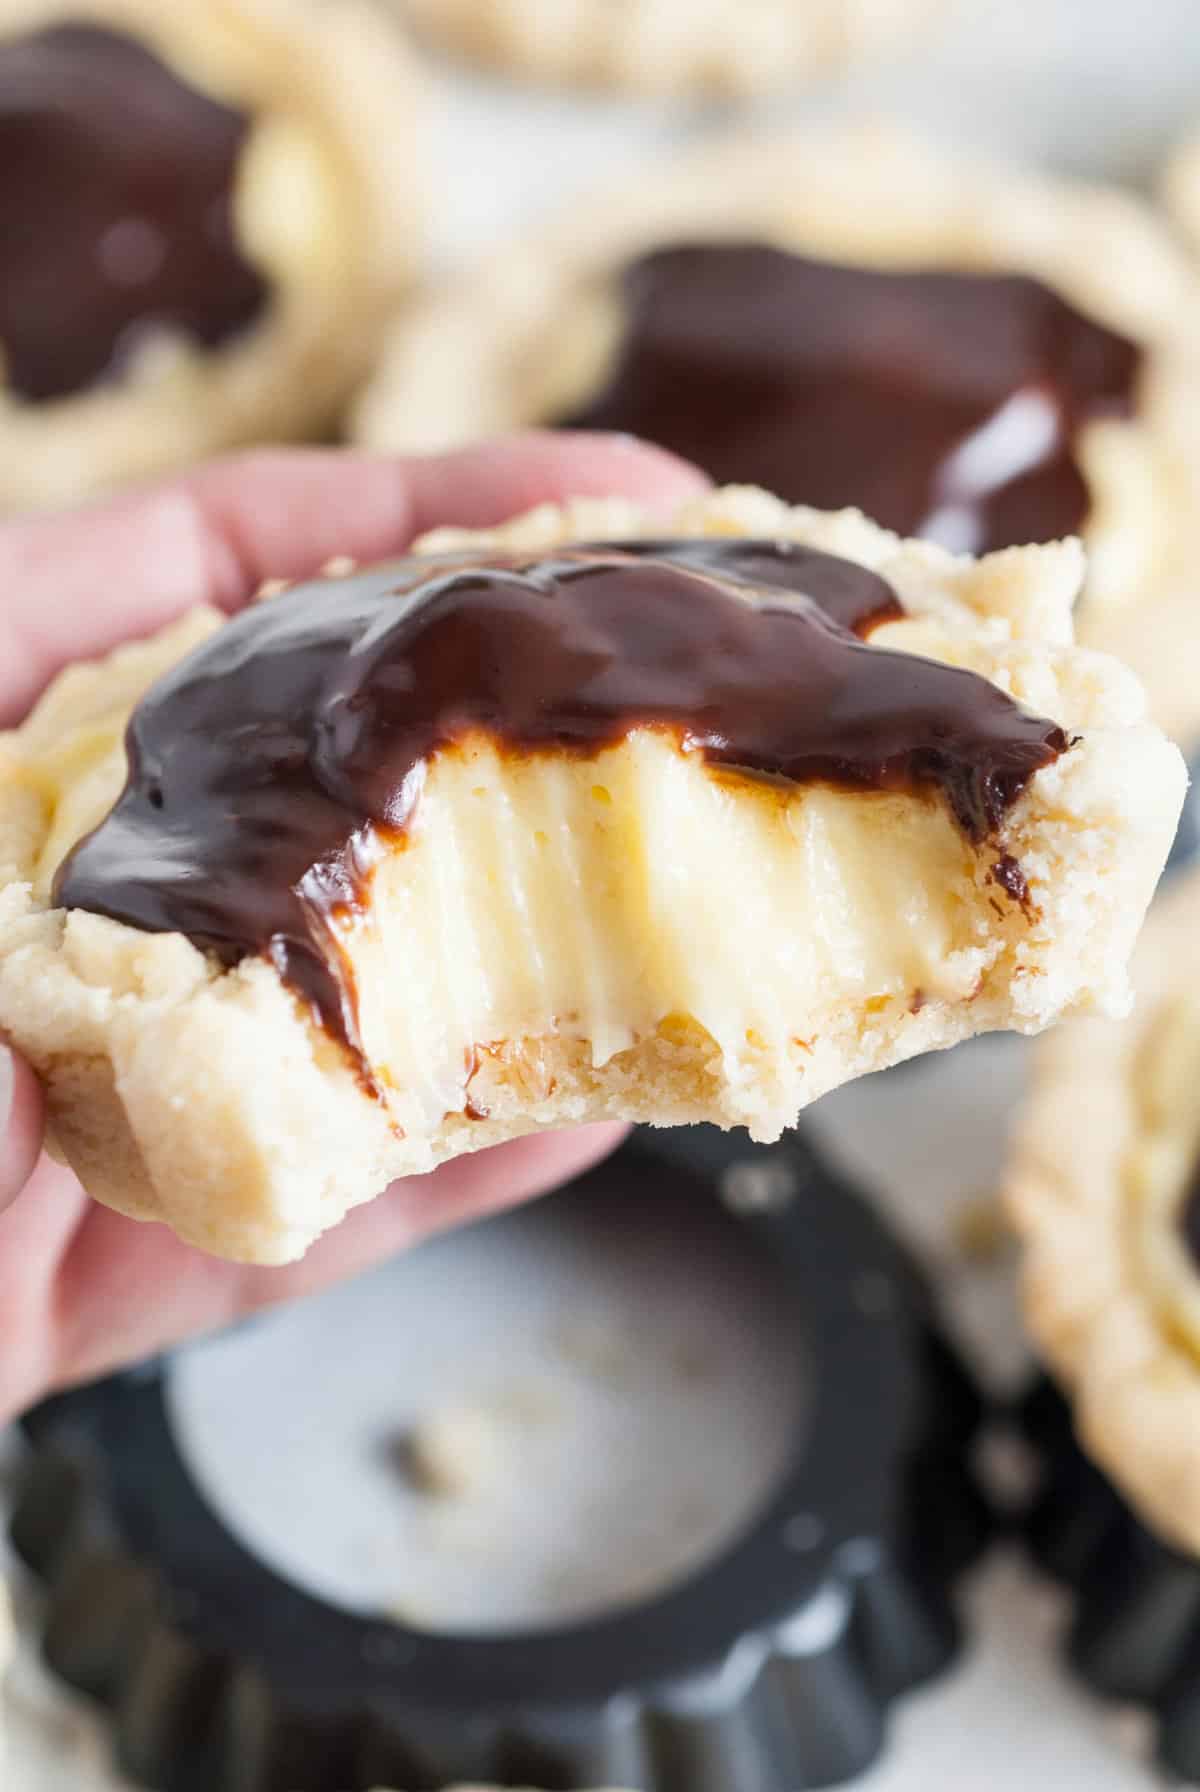 A Boston cream pie cookie with a bite taken out of it.